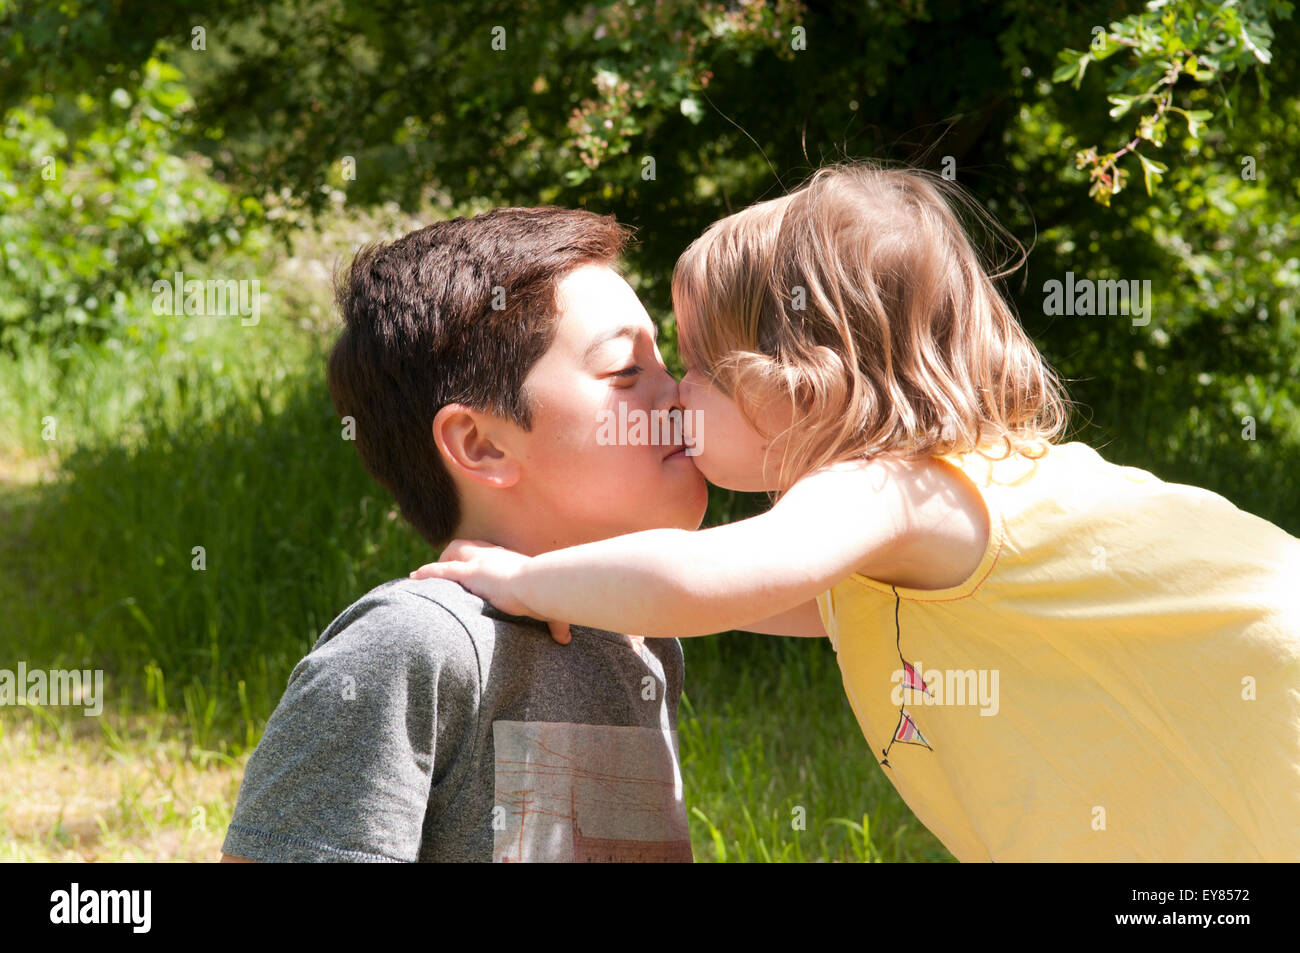 Little Boy And Girl Kissing Stock Photos & Little Boy And Girl.